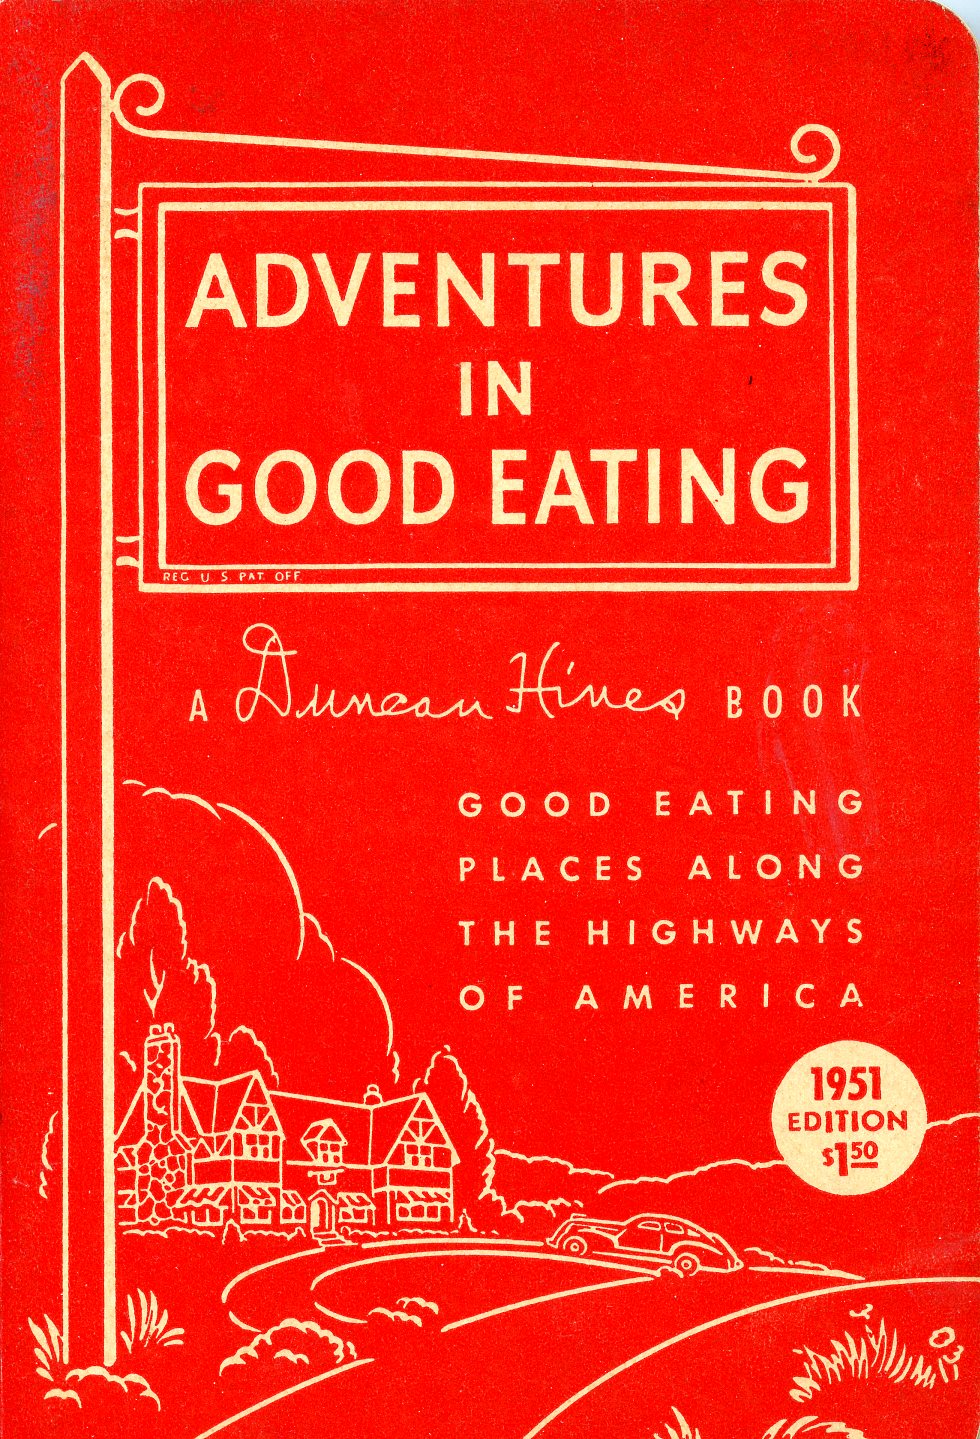 ADVENTURES IN GOOD EATING : GOOD EATING PLACES ALONG THE HIGHWAYS OF